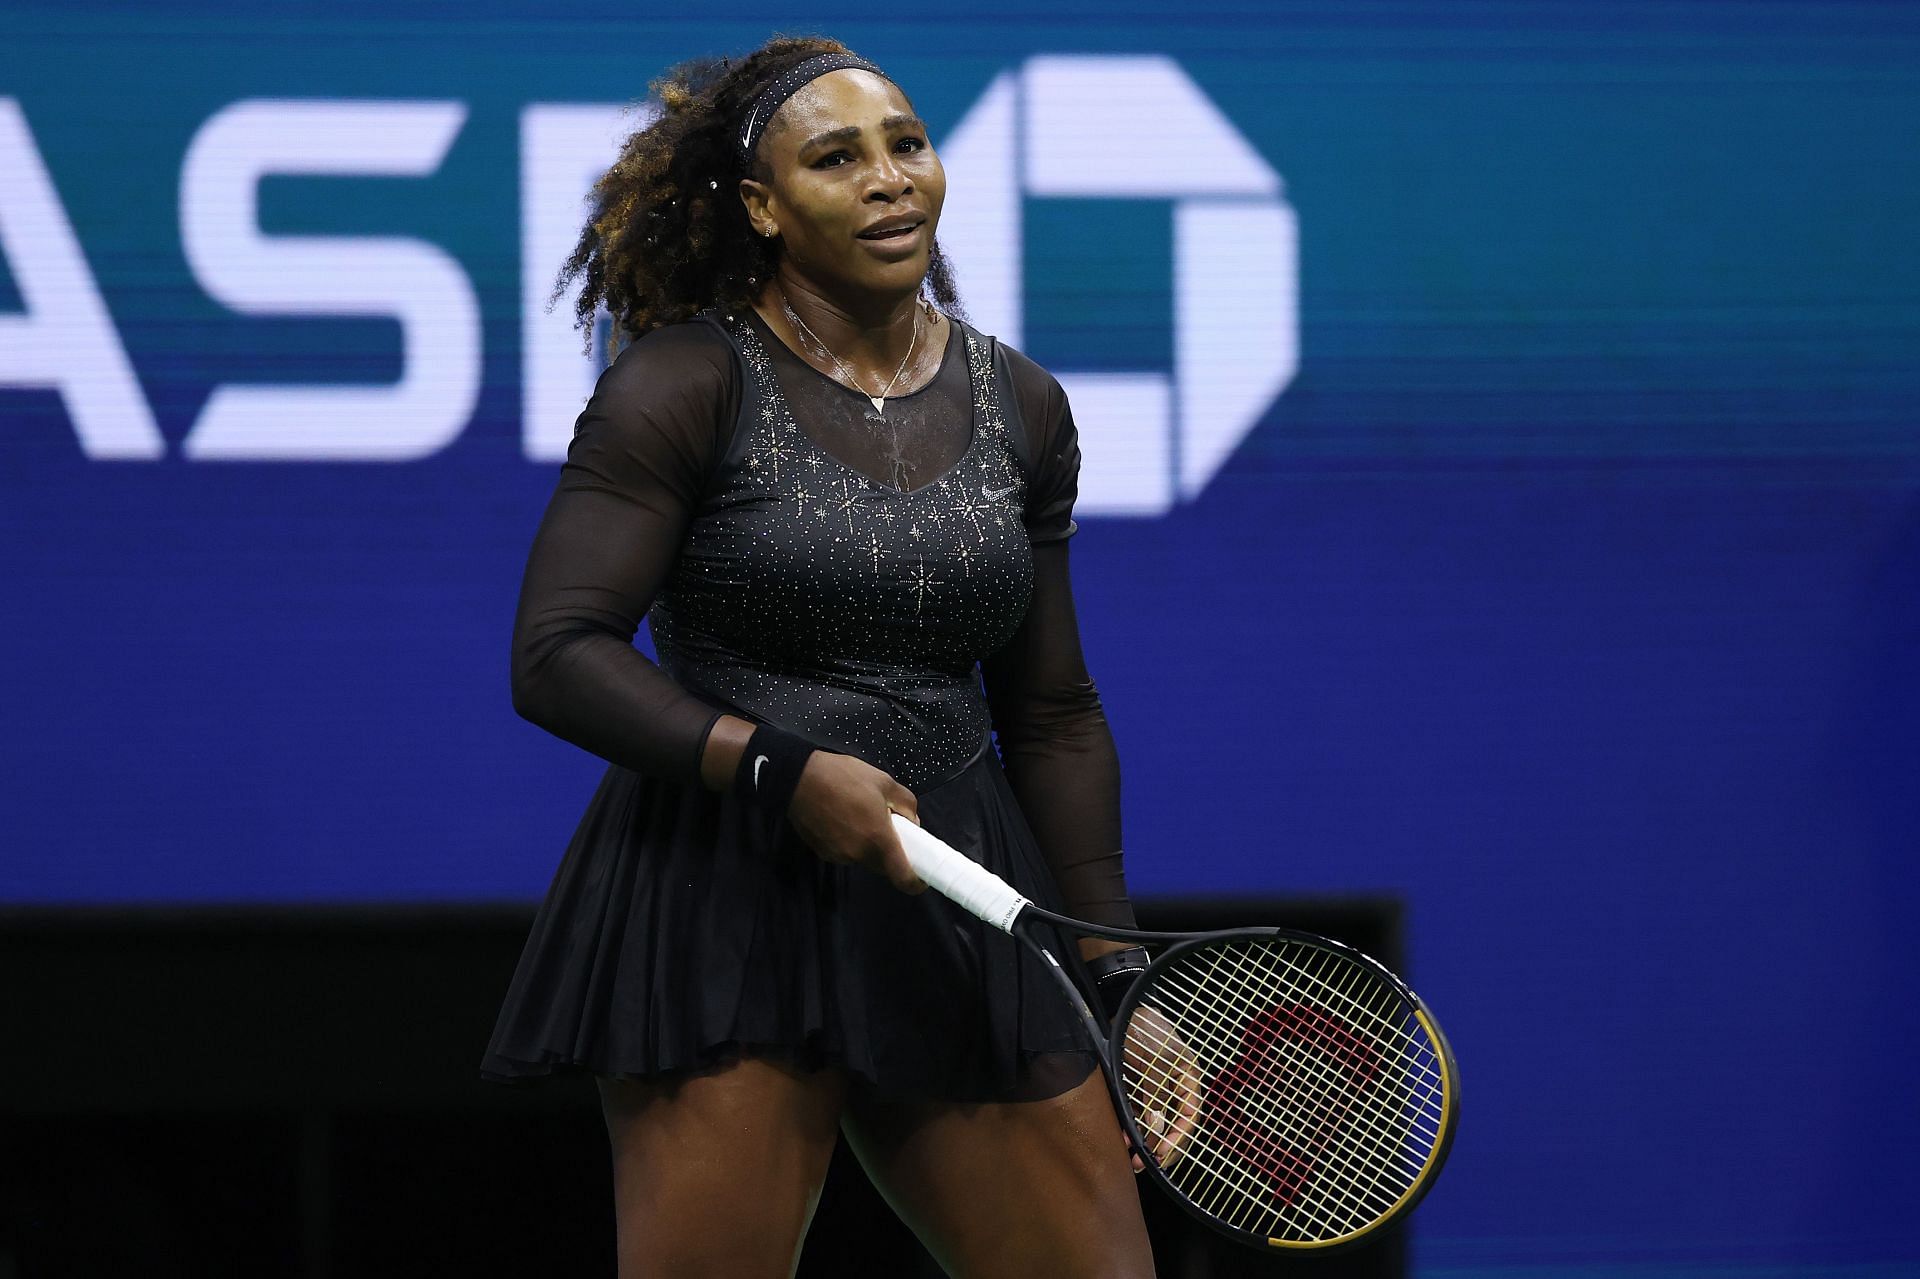 Serena Williams during the last match of her career at the 2022 US Open